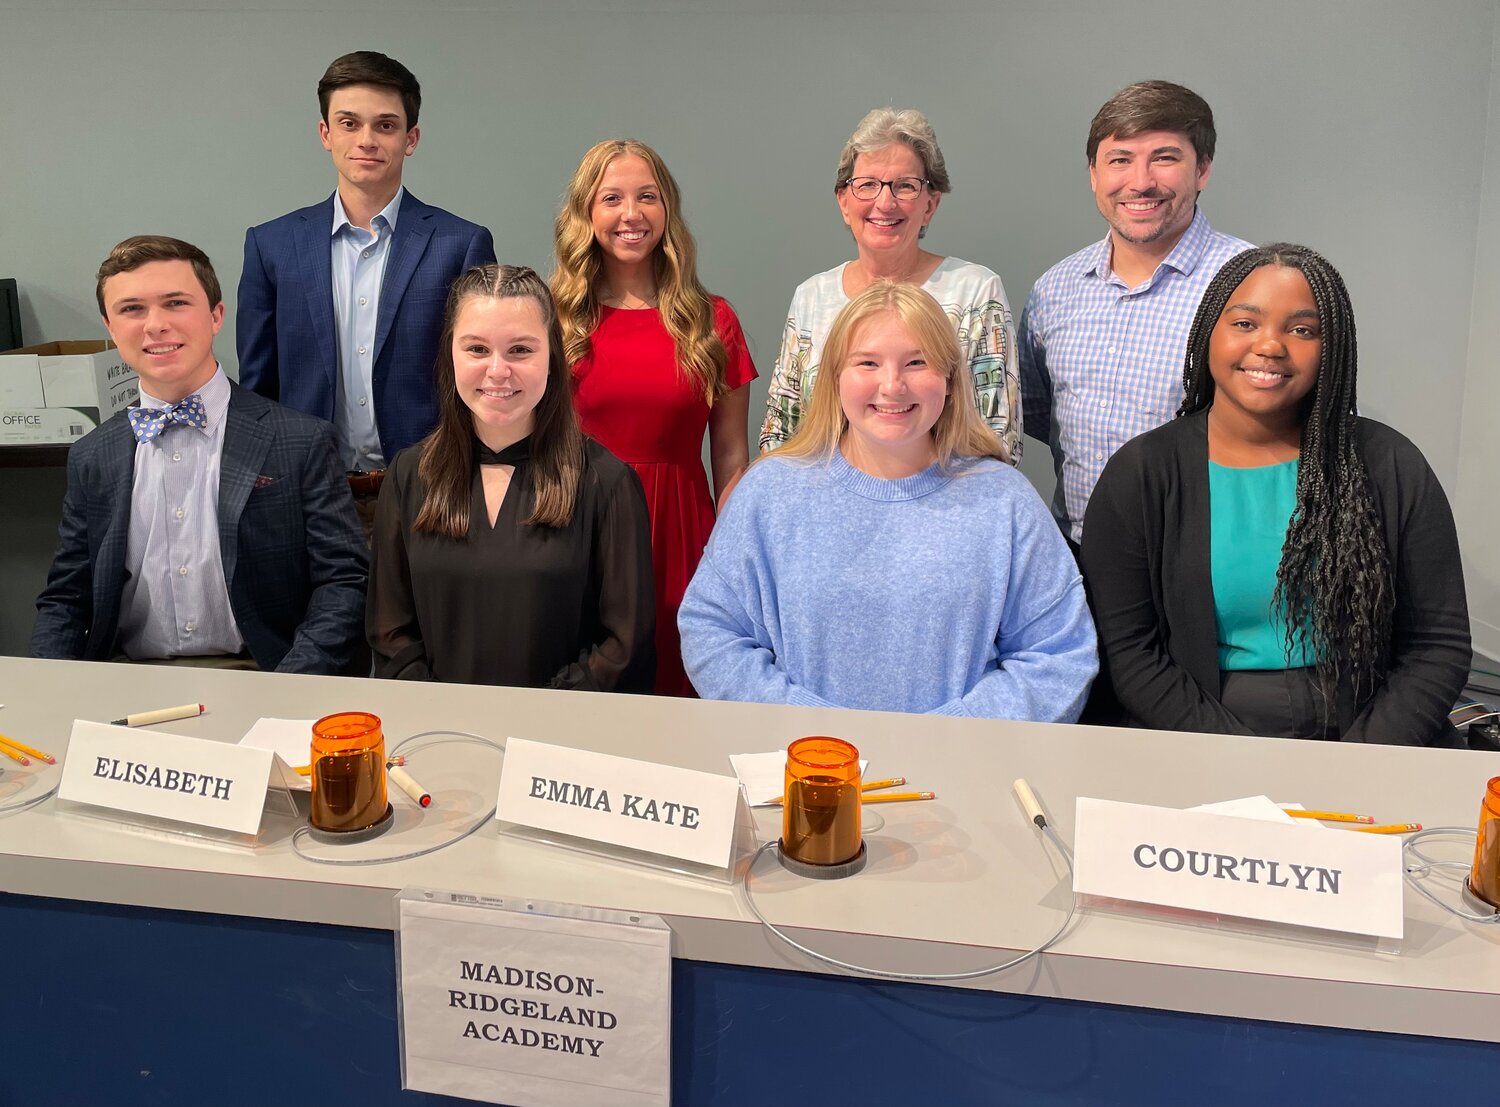 Pictured, seated from left, are Will Thompson, Elisabeth Morton, Emma Kate Cook, and Courtlyn Taylor (Back) Price Dickerson, Sims Jones, Donna Allen, and Chance Theriot.